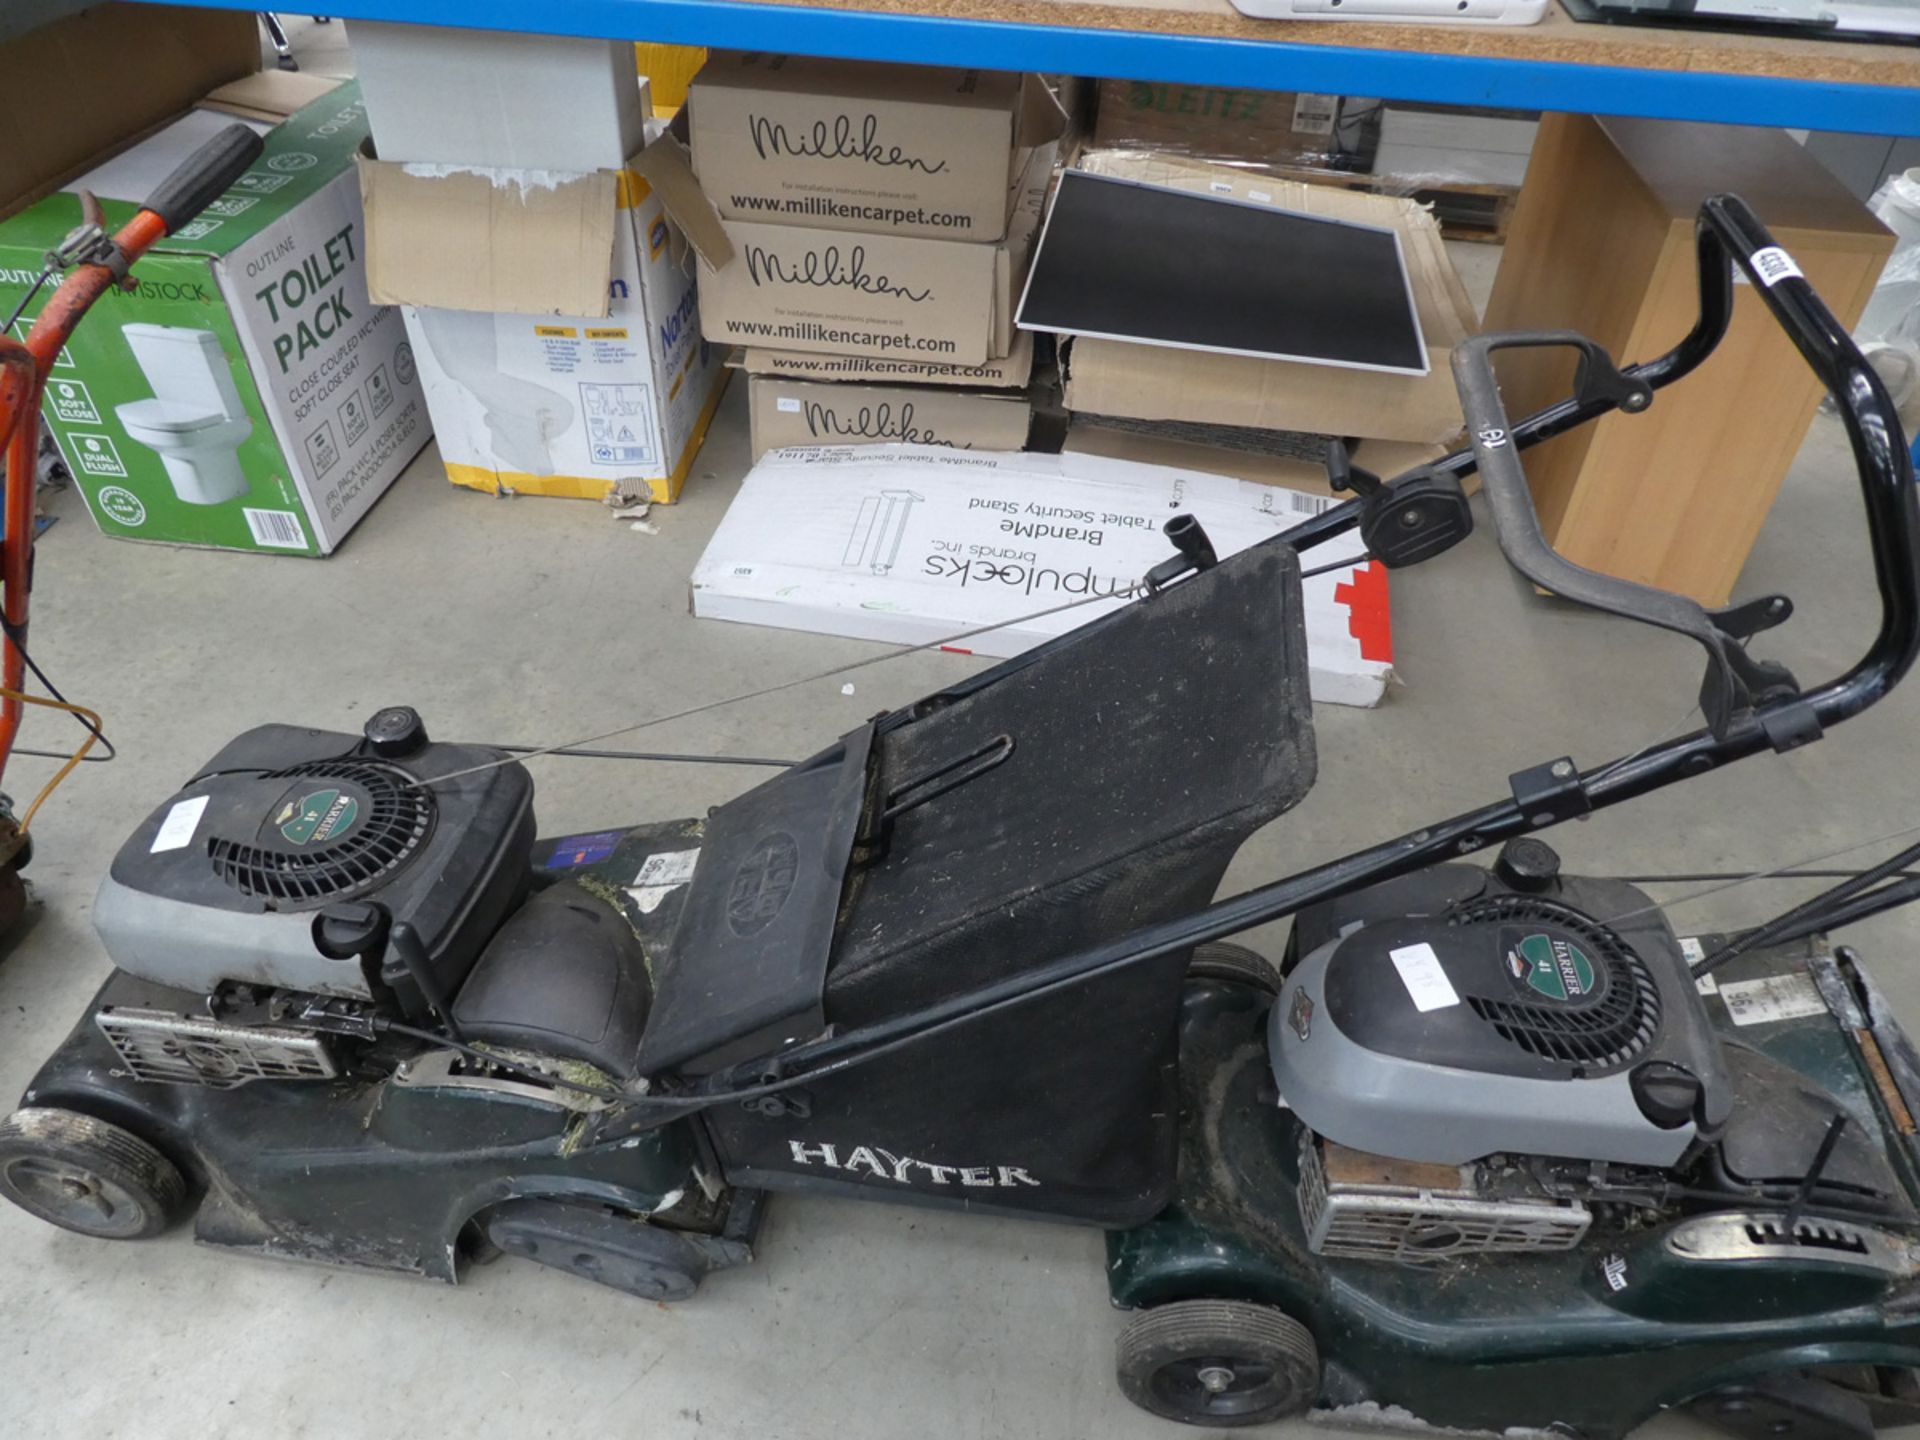 Hayter Harrier petrol powered rotary lawn mower with box